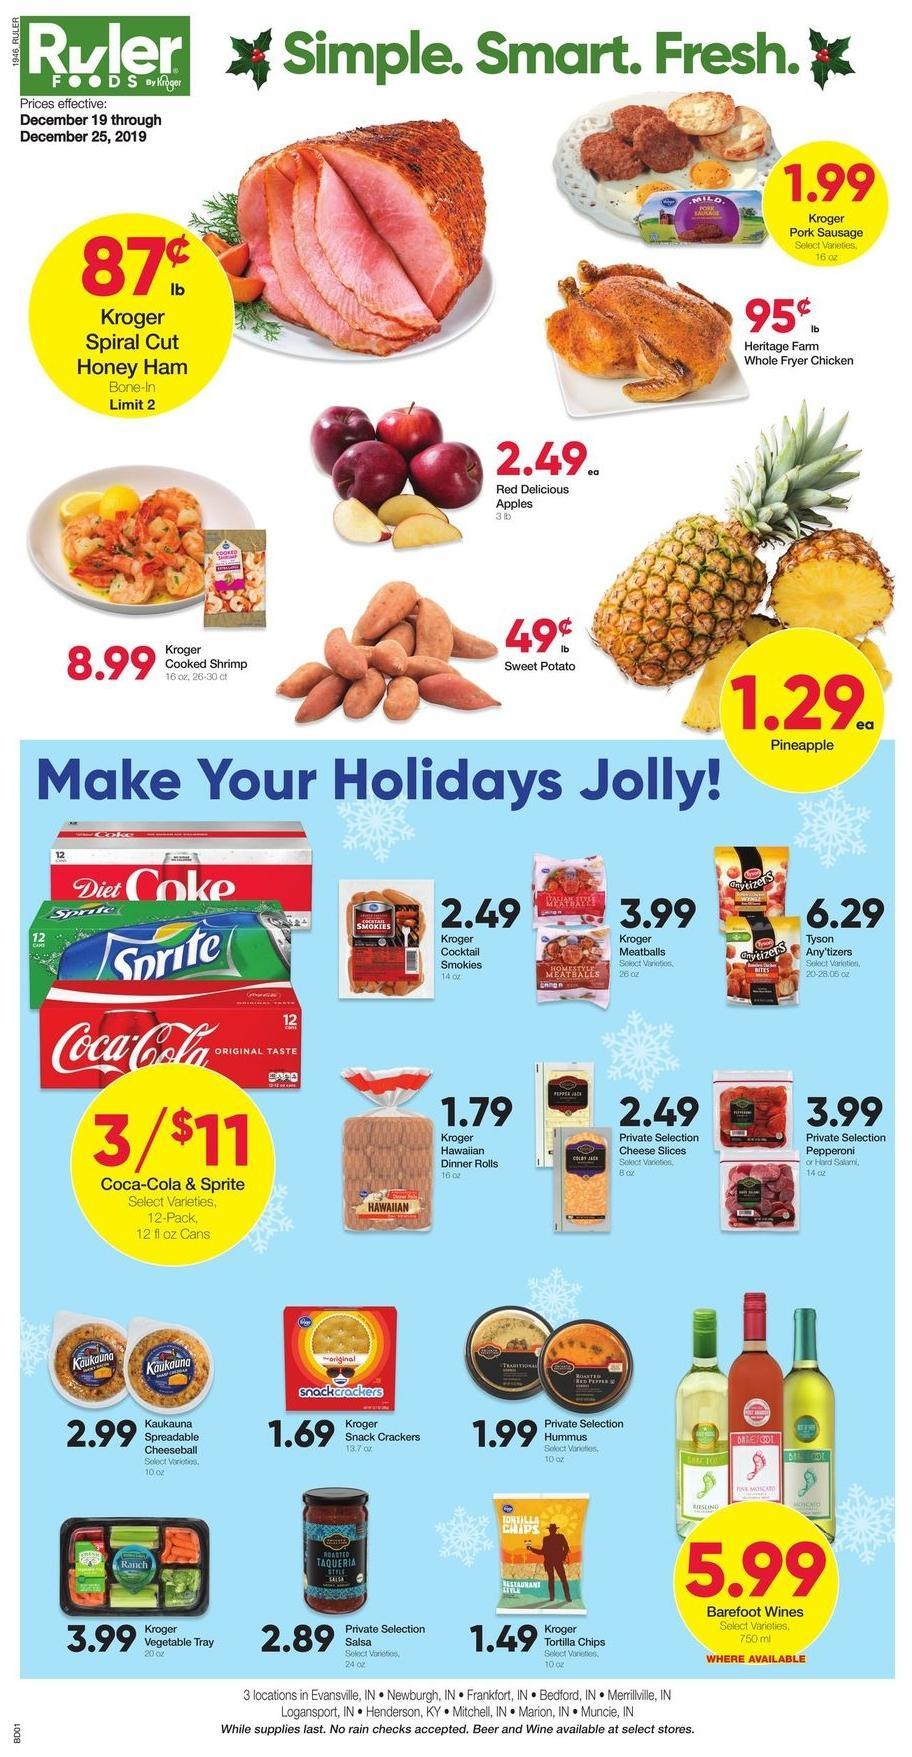 Ruler Foods Weekly Ad from December 19